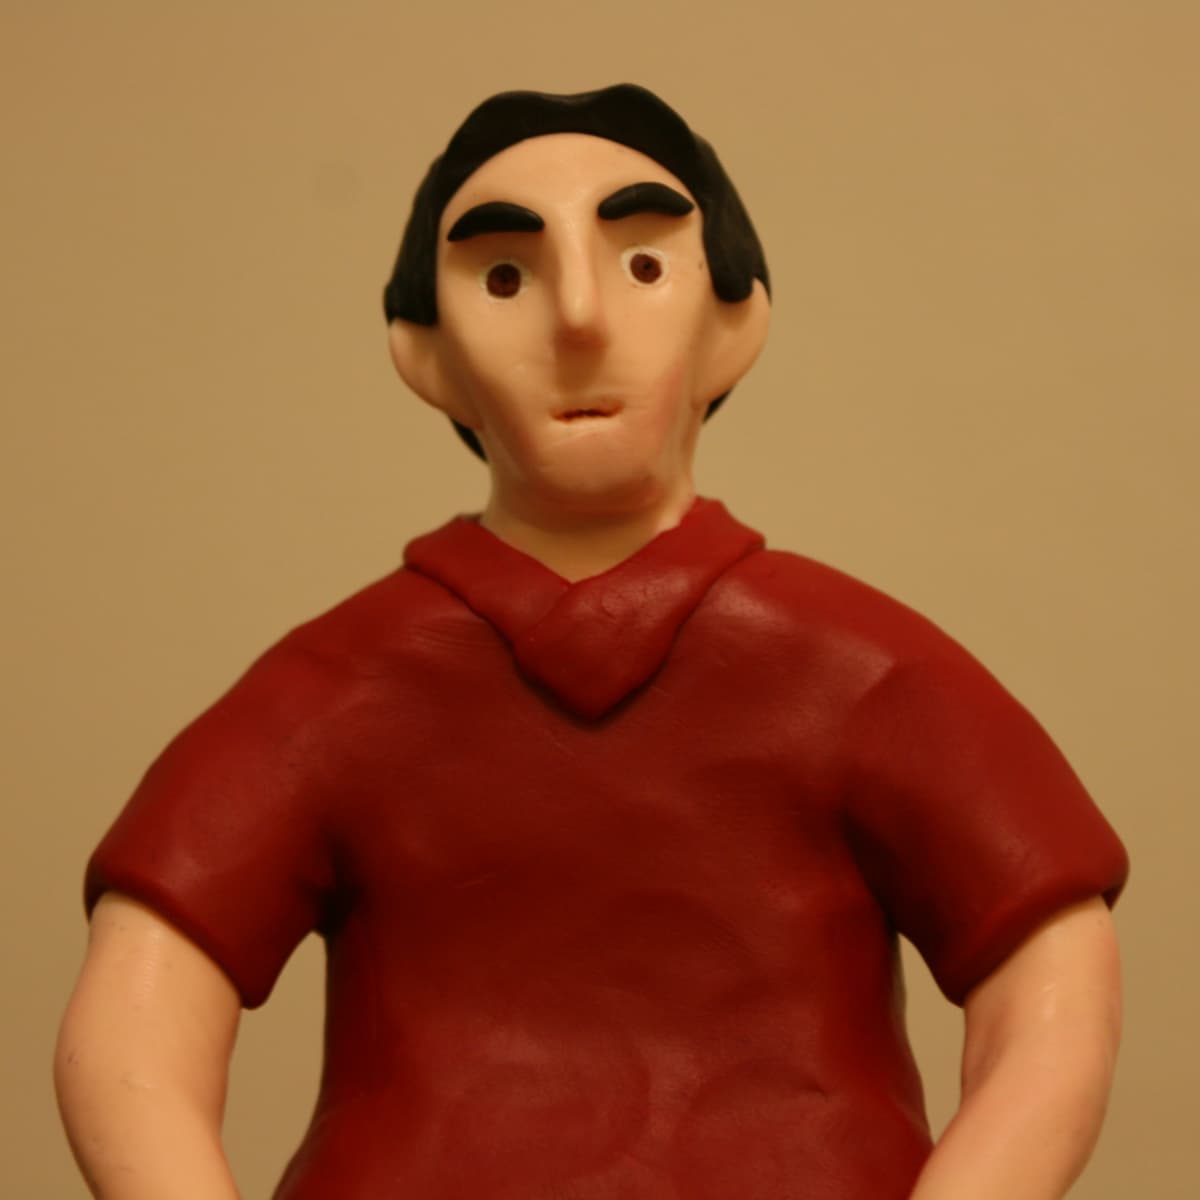 How to Create Polymer Clay Figures for Stop-Motion Animation - HubPages